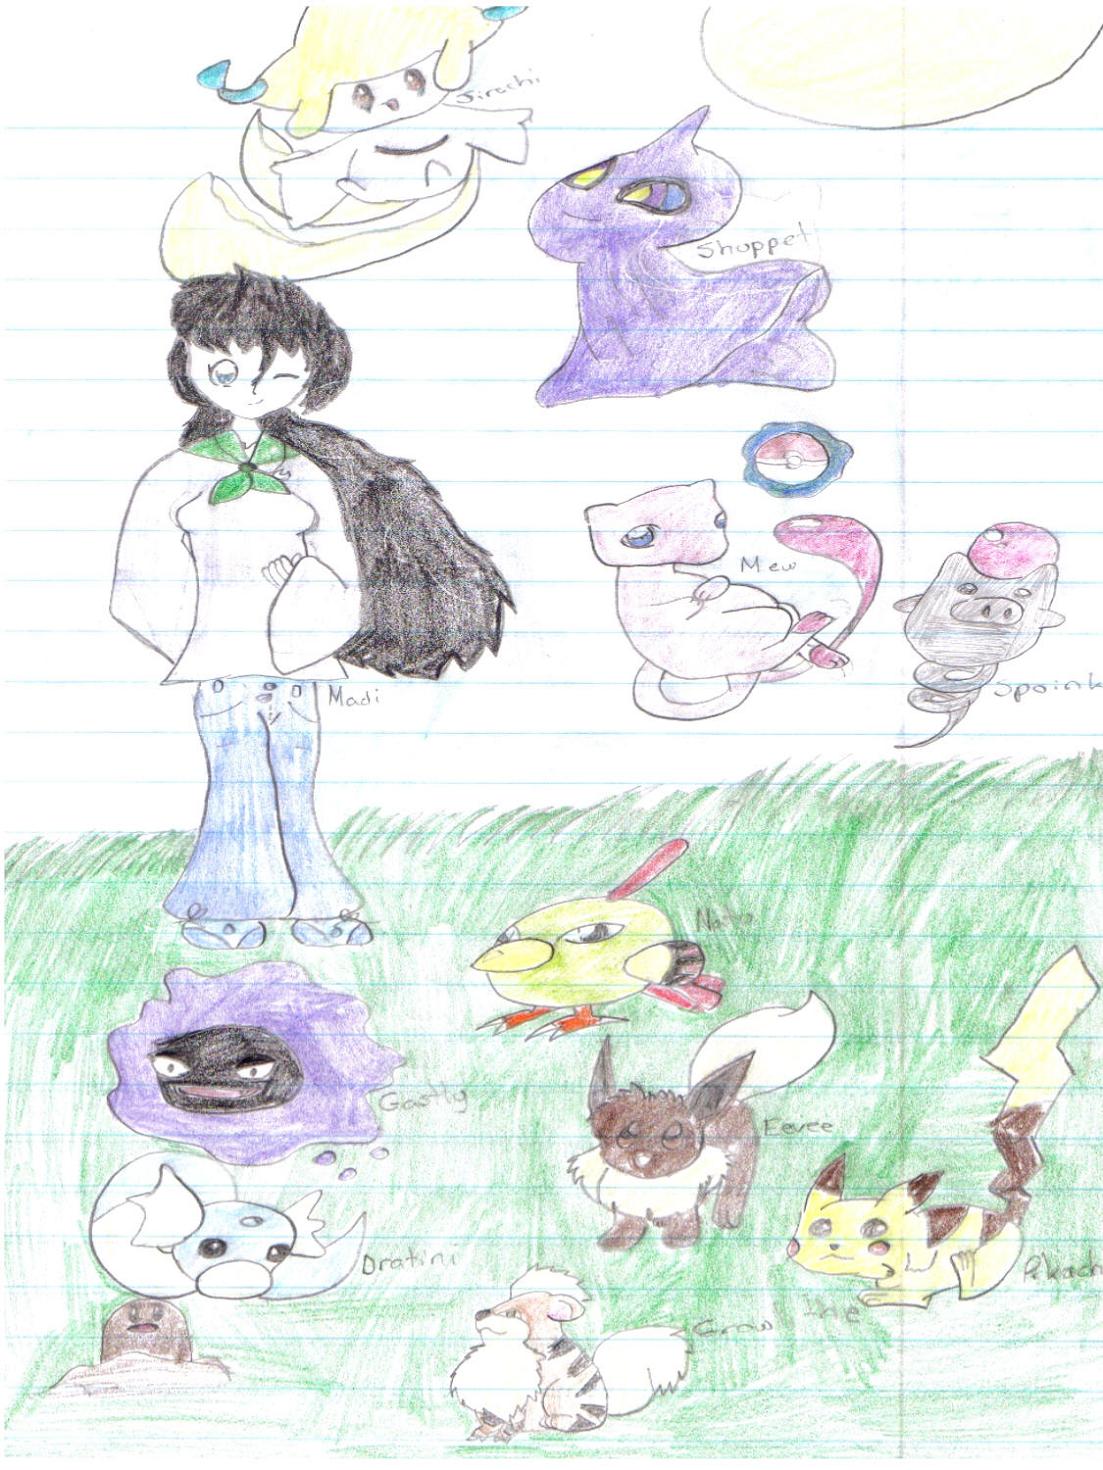 Me and my pokemon by tabbycatzigzig